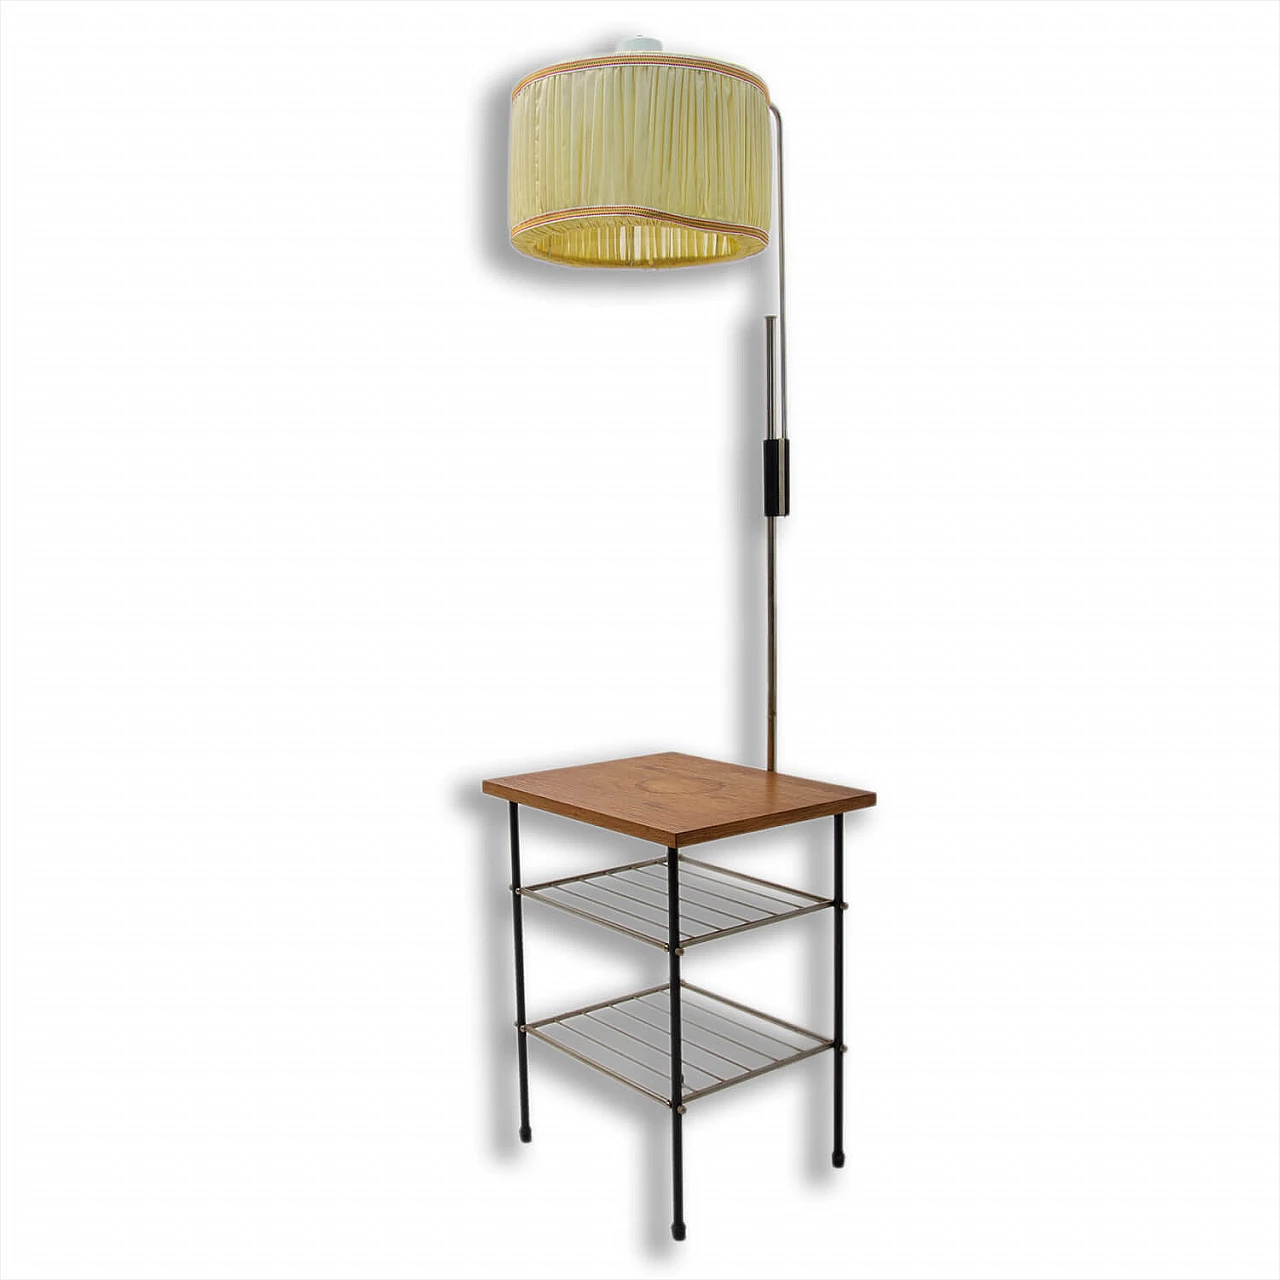 Floor lamp with storage compartment, 1970s 1364357